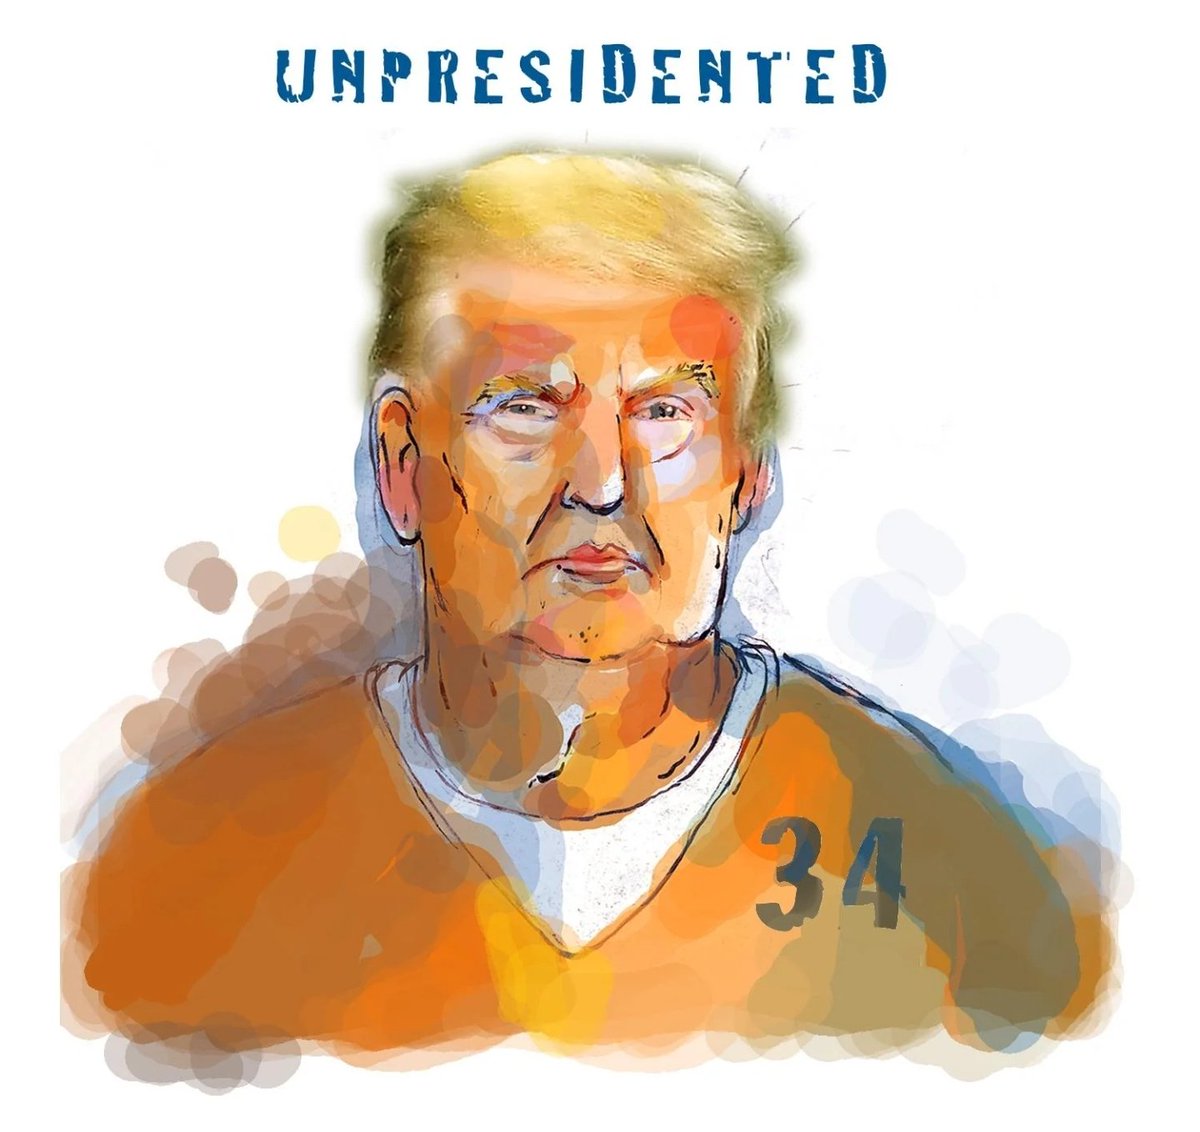 Many people are saying that if and when #ConvictedFelonTrump goes to prison, he can have inmate number 34 all to himself. Make sure we get 1,000 fast RTs and replies to get this hashtag #ConvictedFelonTrump trending so he can see it and weep real tears of joy or whatever.